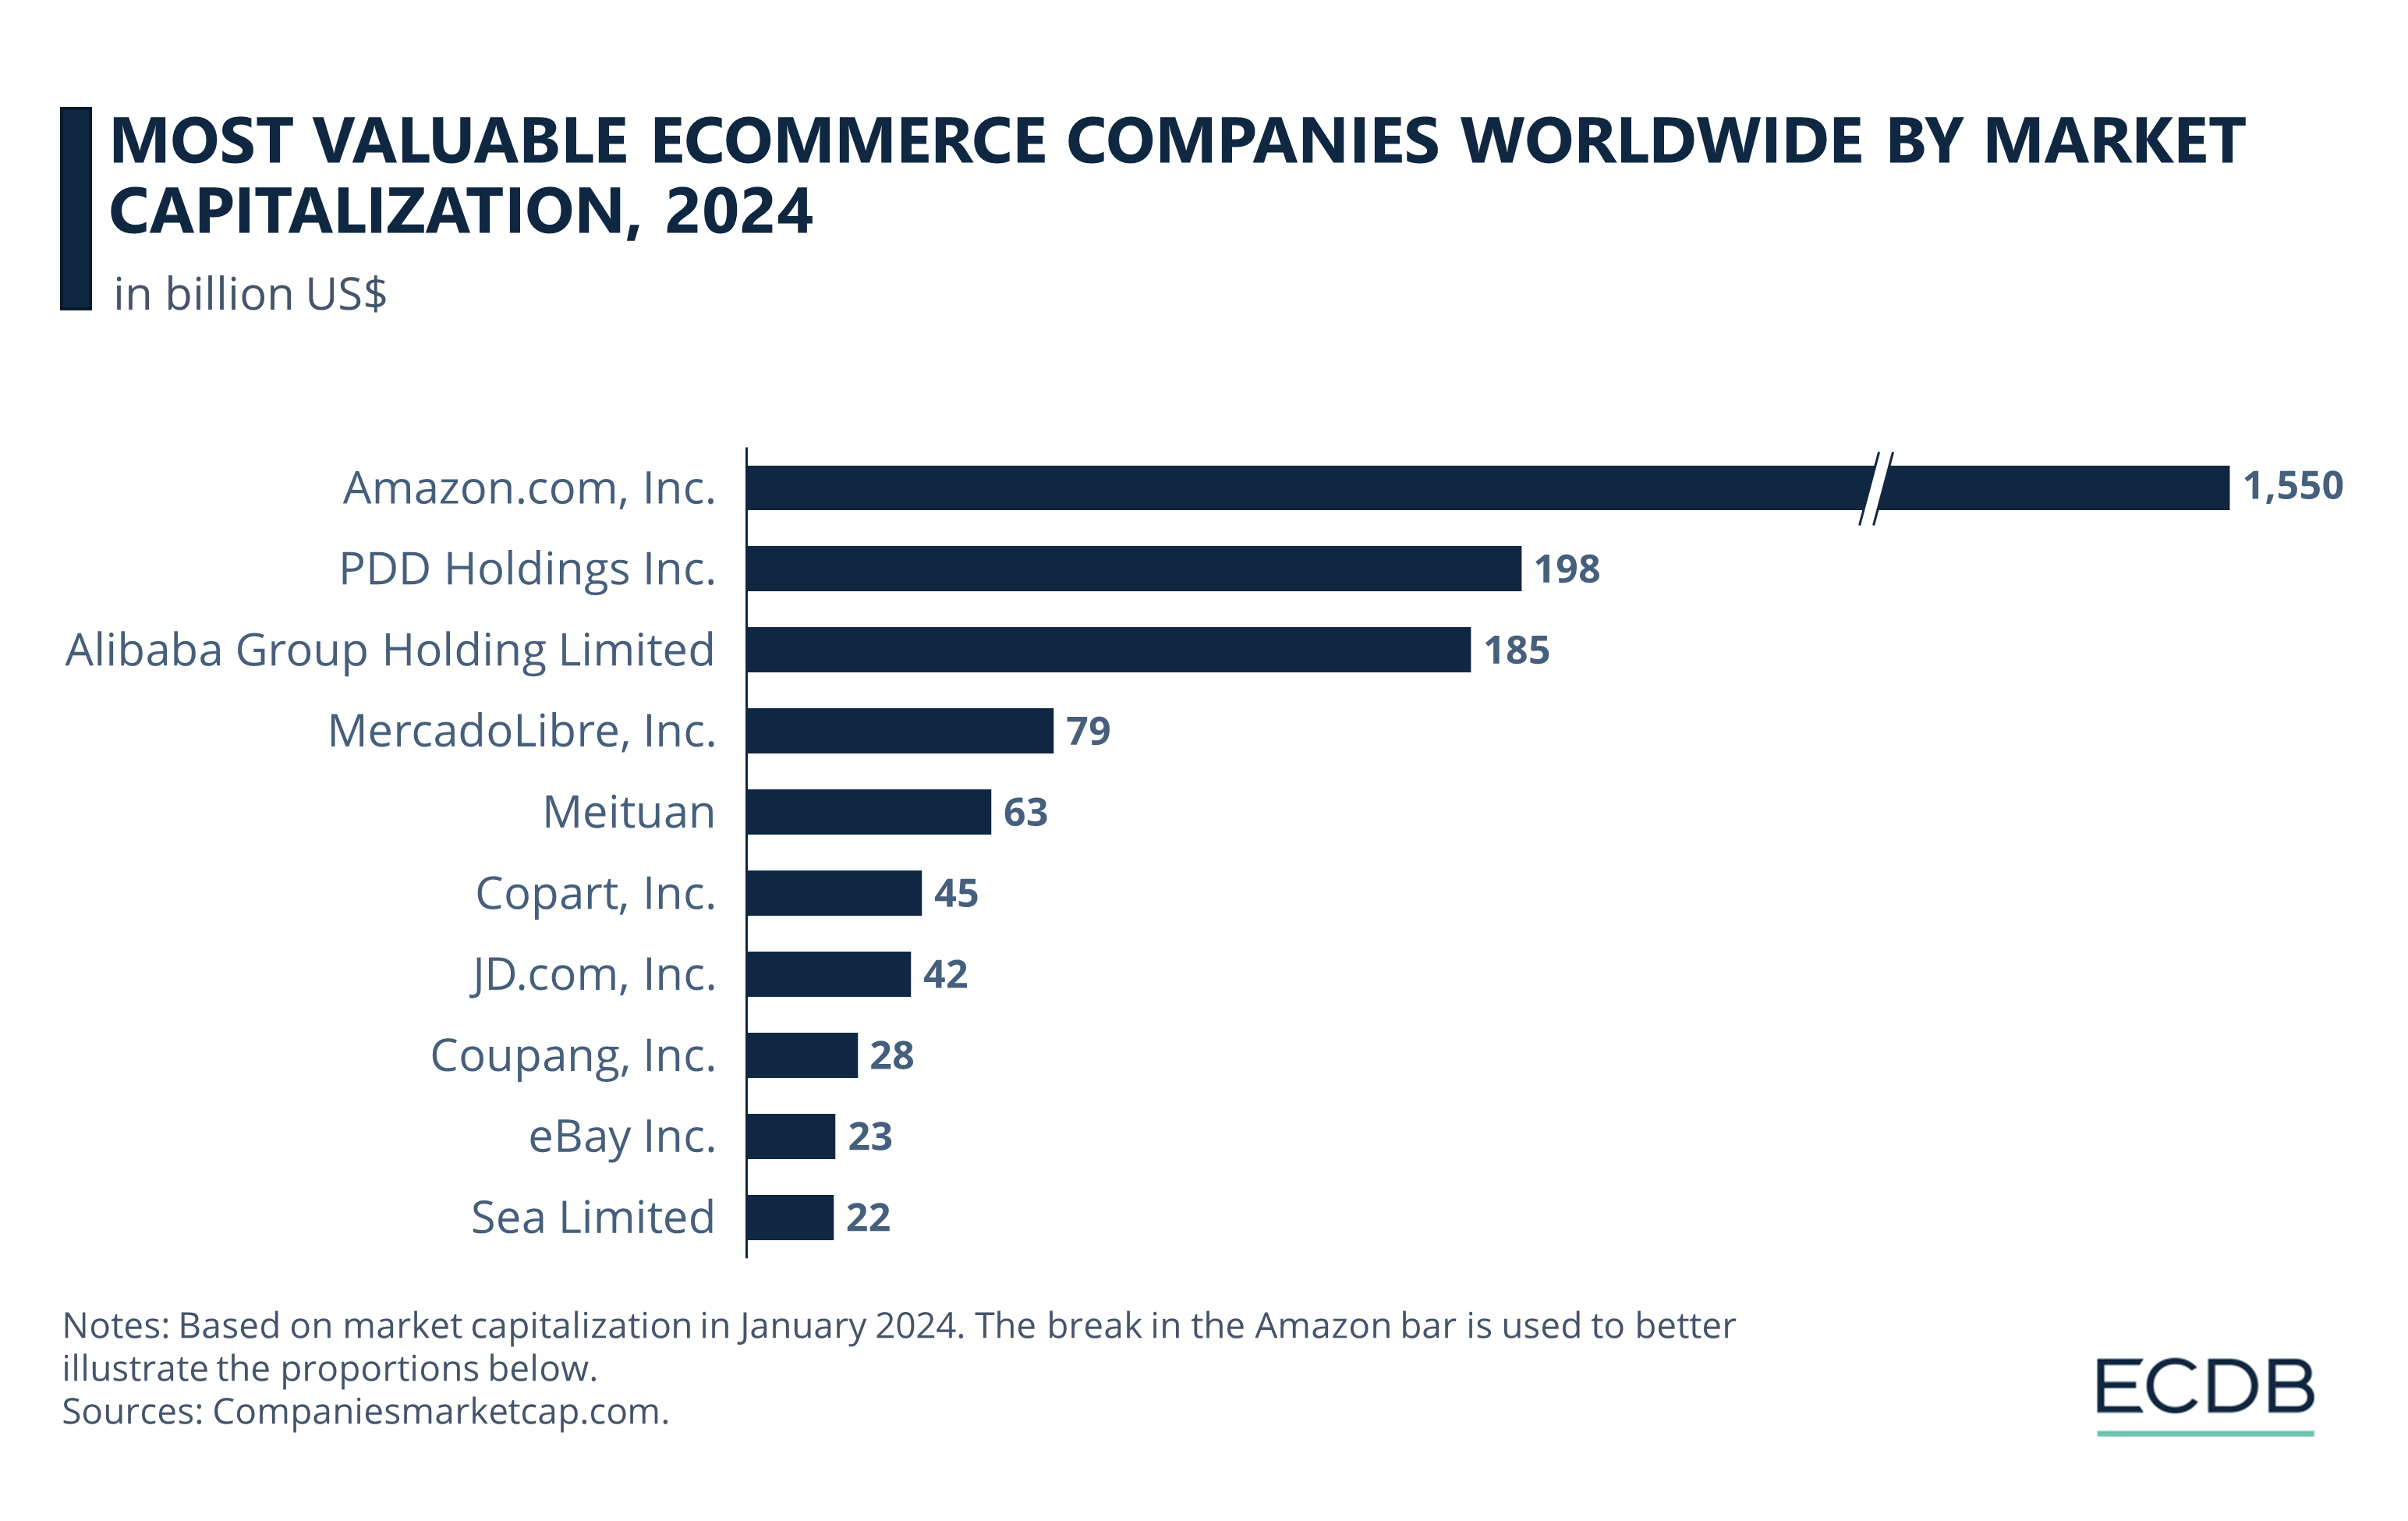 Most Valuable eCommerce Companies Worldwide by Market Capitalization, 2024